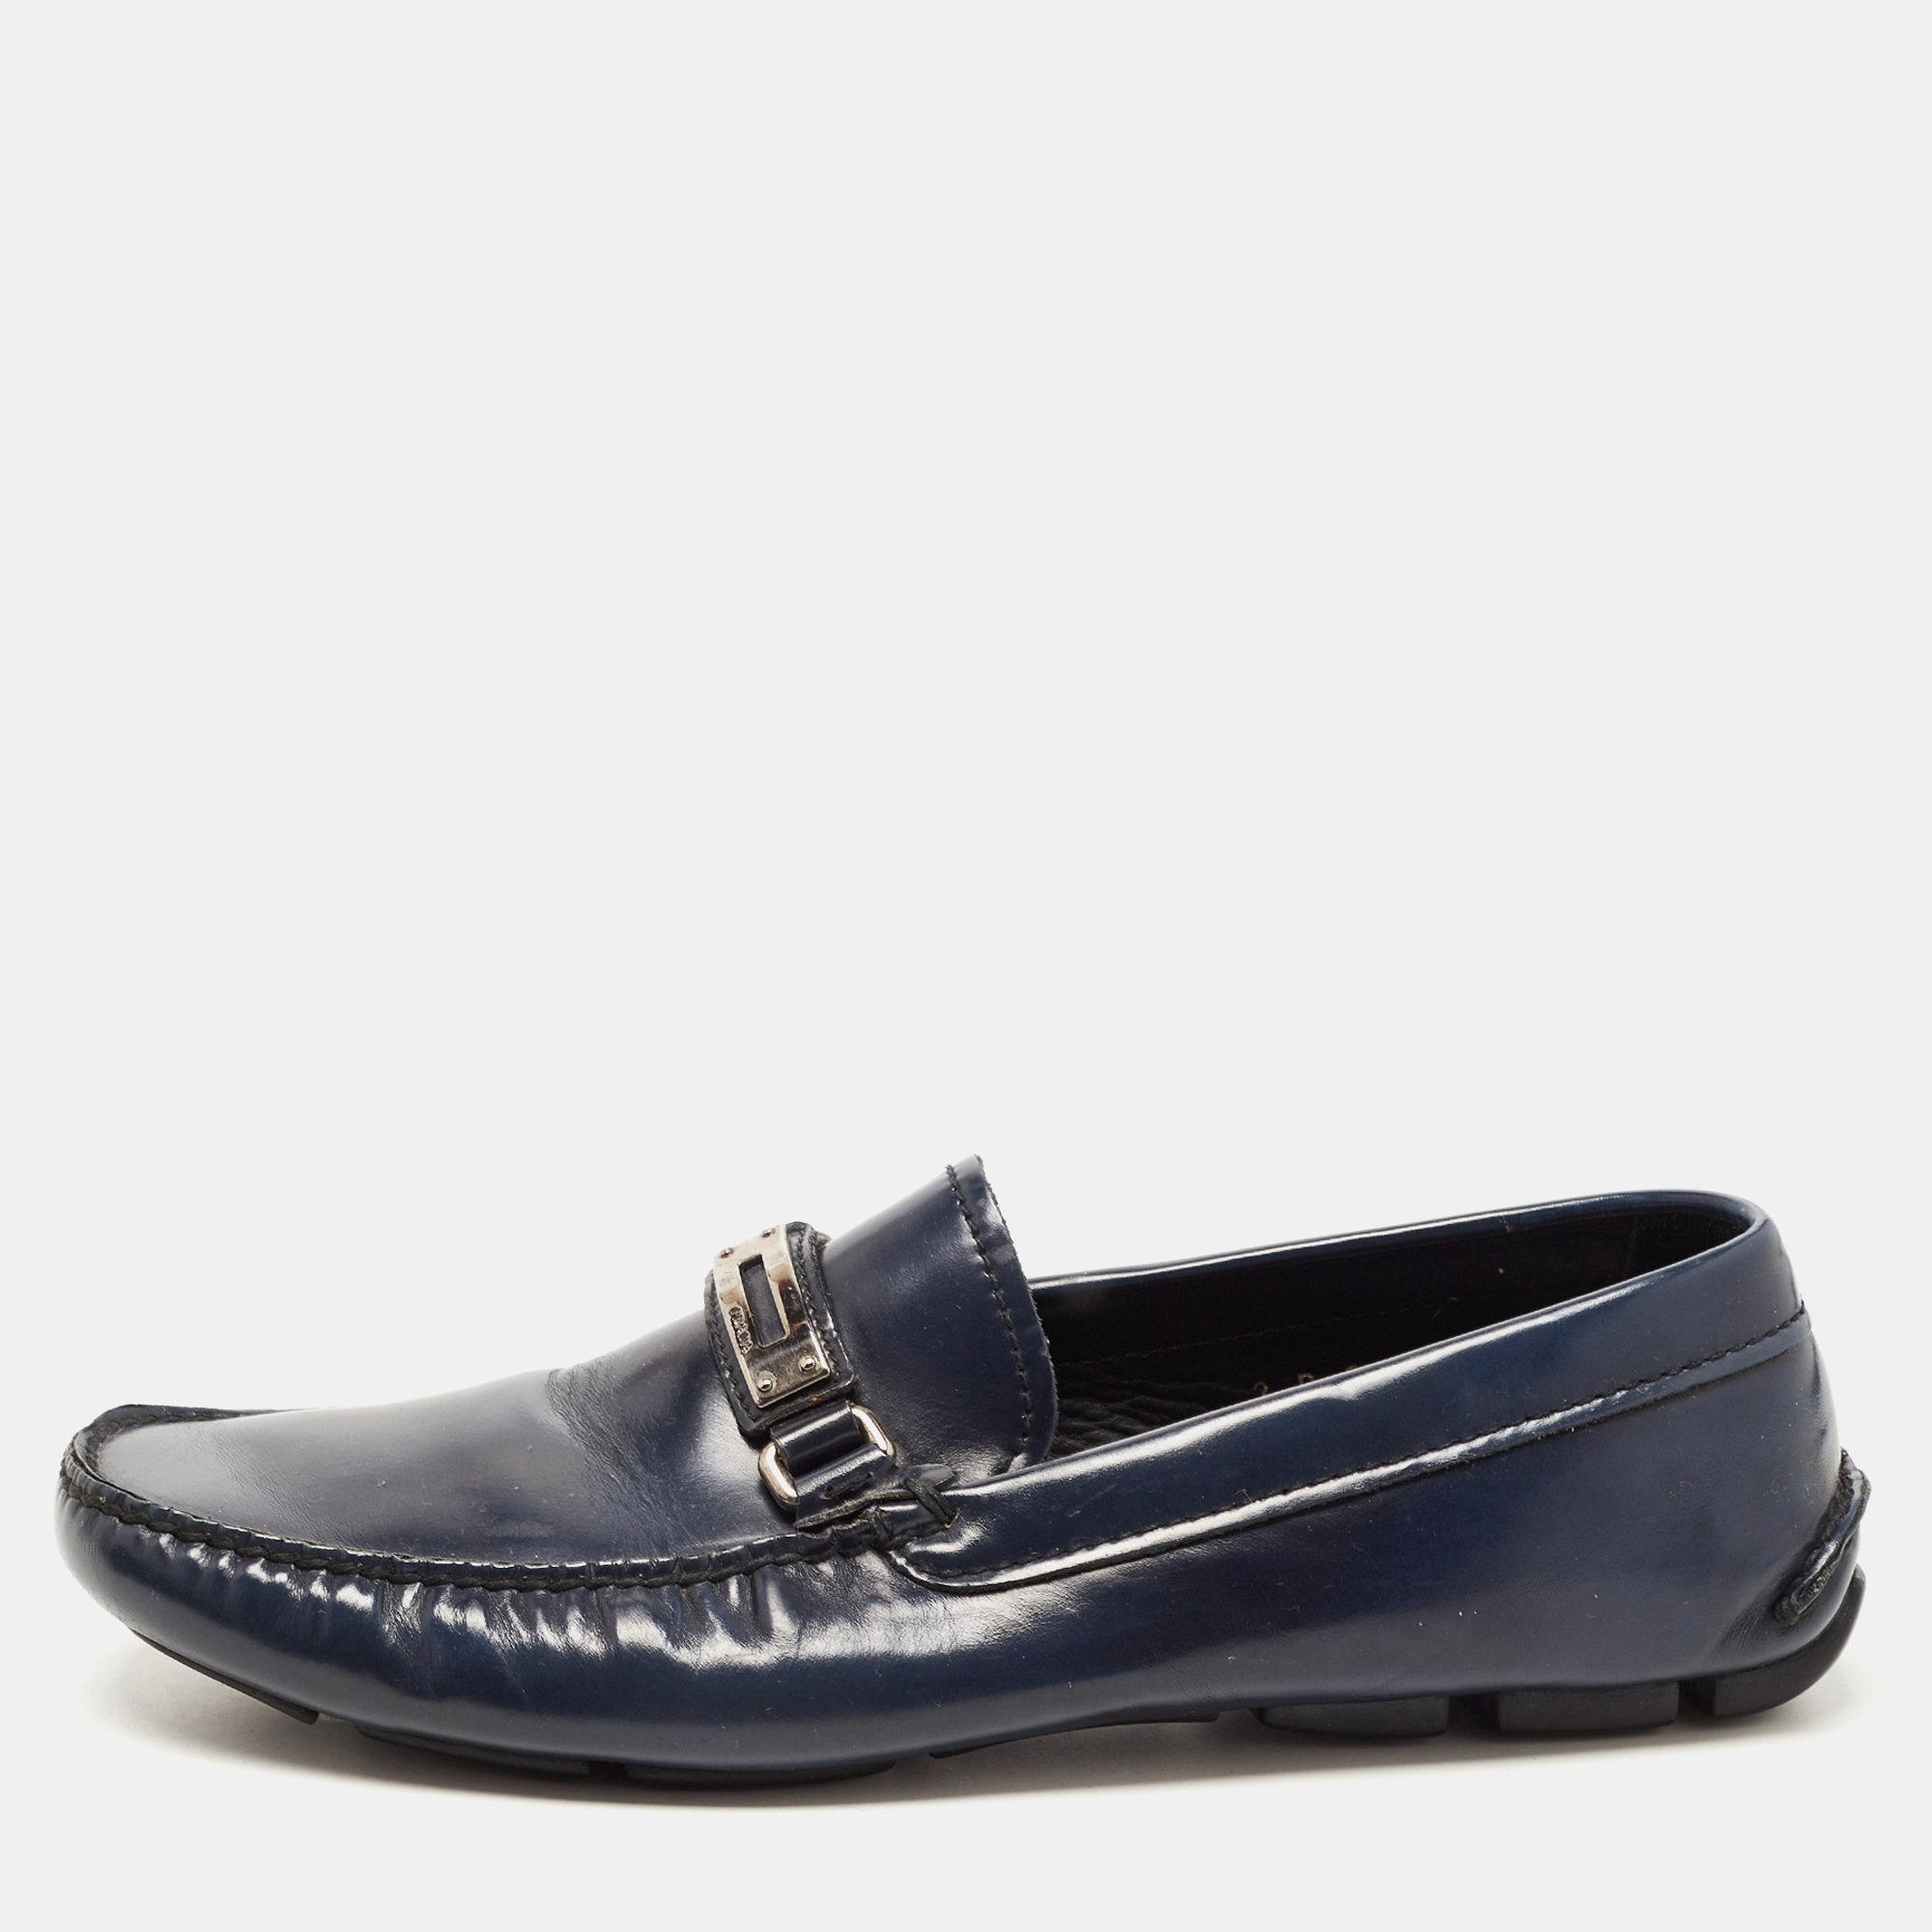 Pre-owned Prada Navy Blue Leather Slip On Loafers Sie 41.5